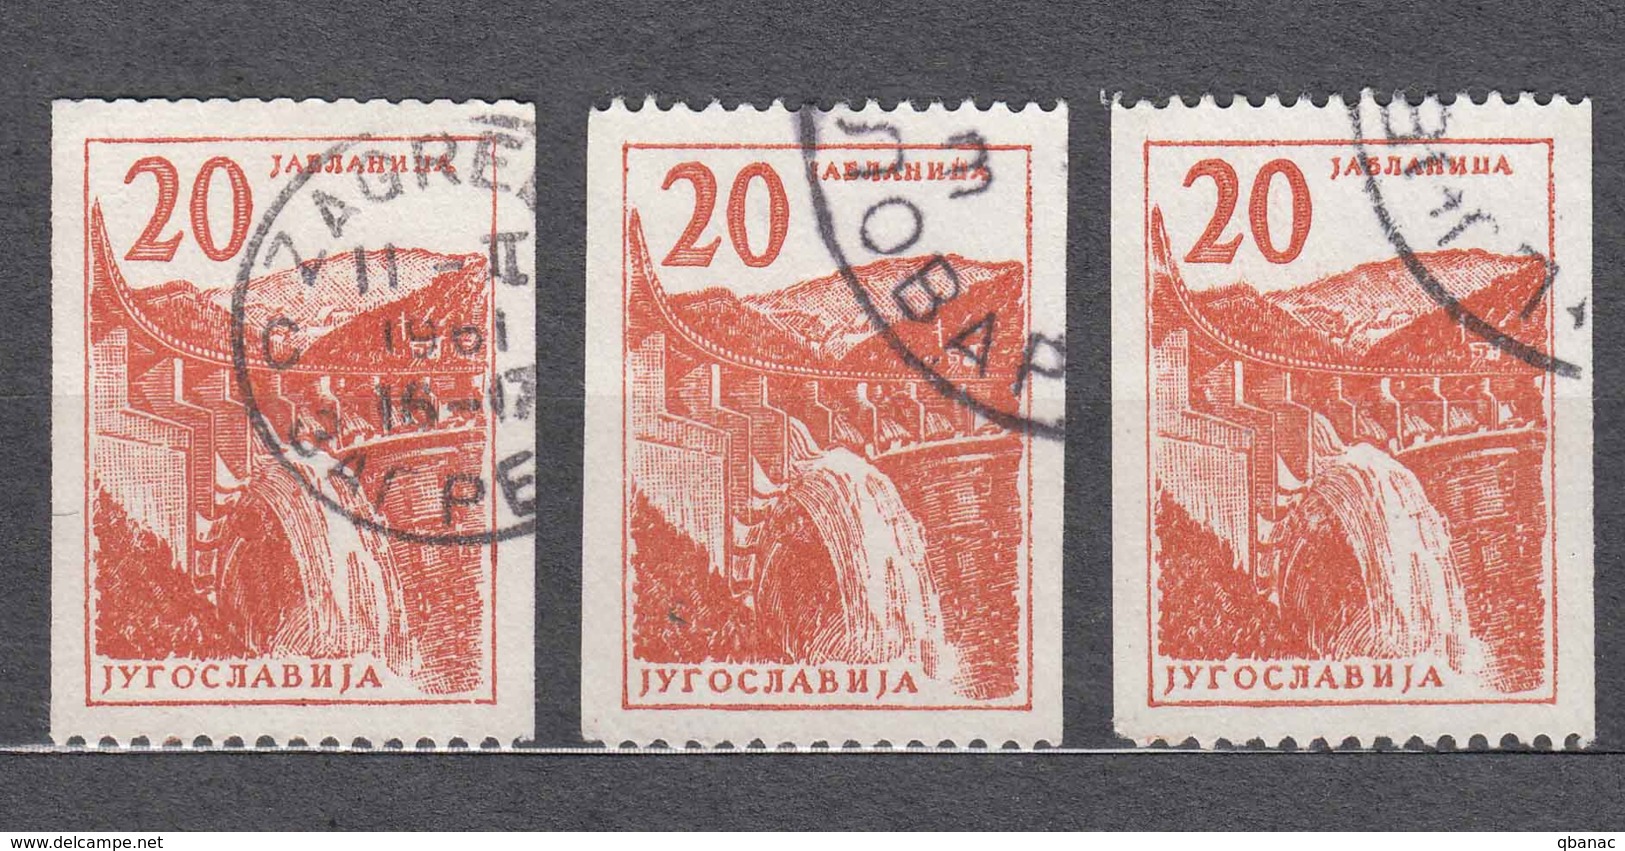 Yugoslavia Republic 1959 Stamps From Rollen Mi#899 Three Pieces Used - Oblitérés